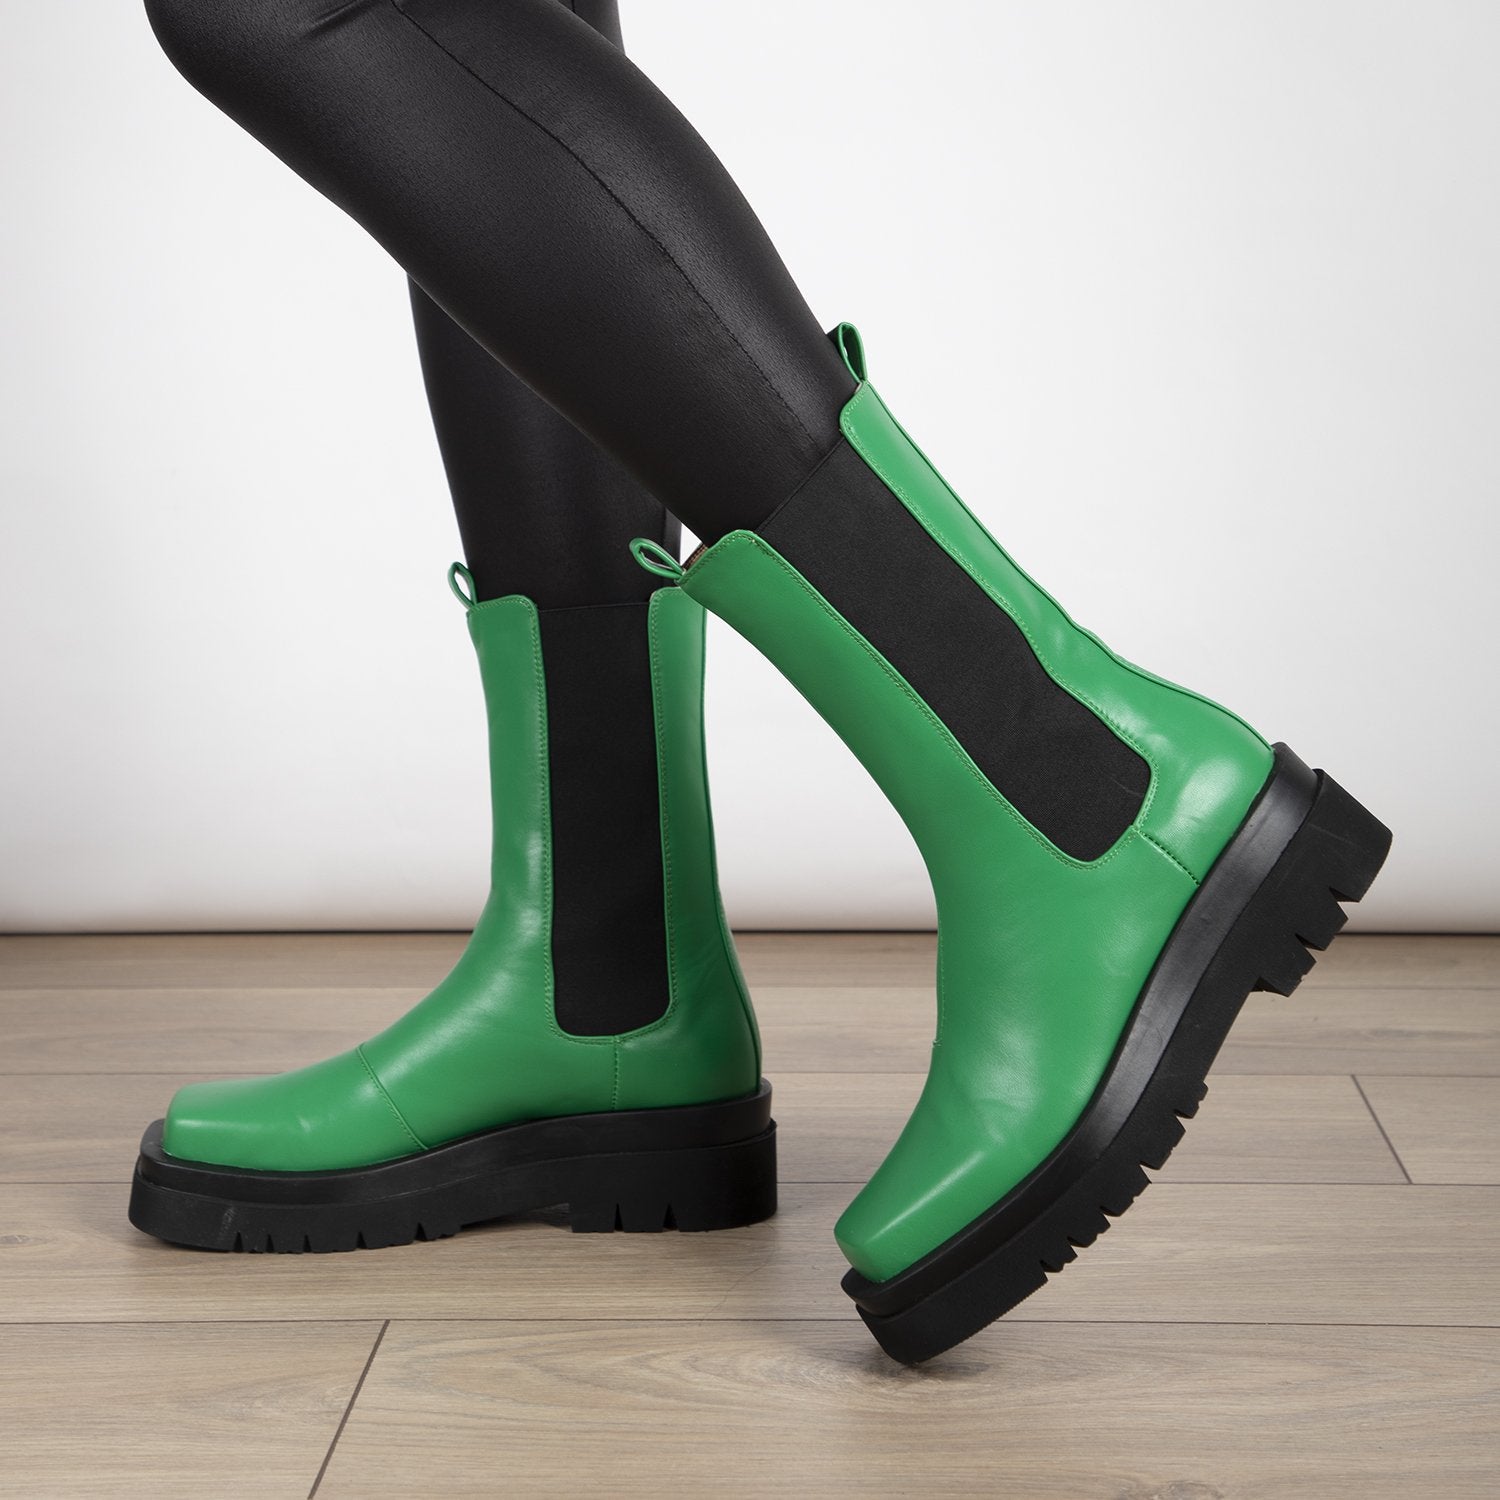 RAID Newport Ankle Boot in Green